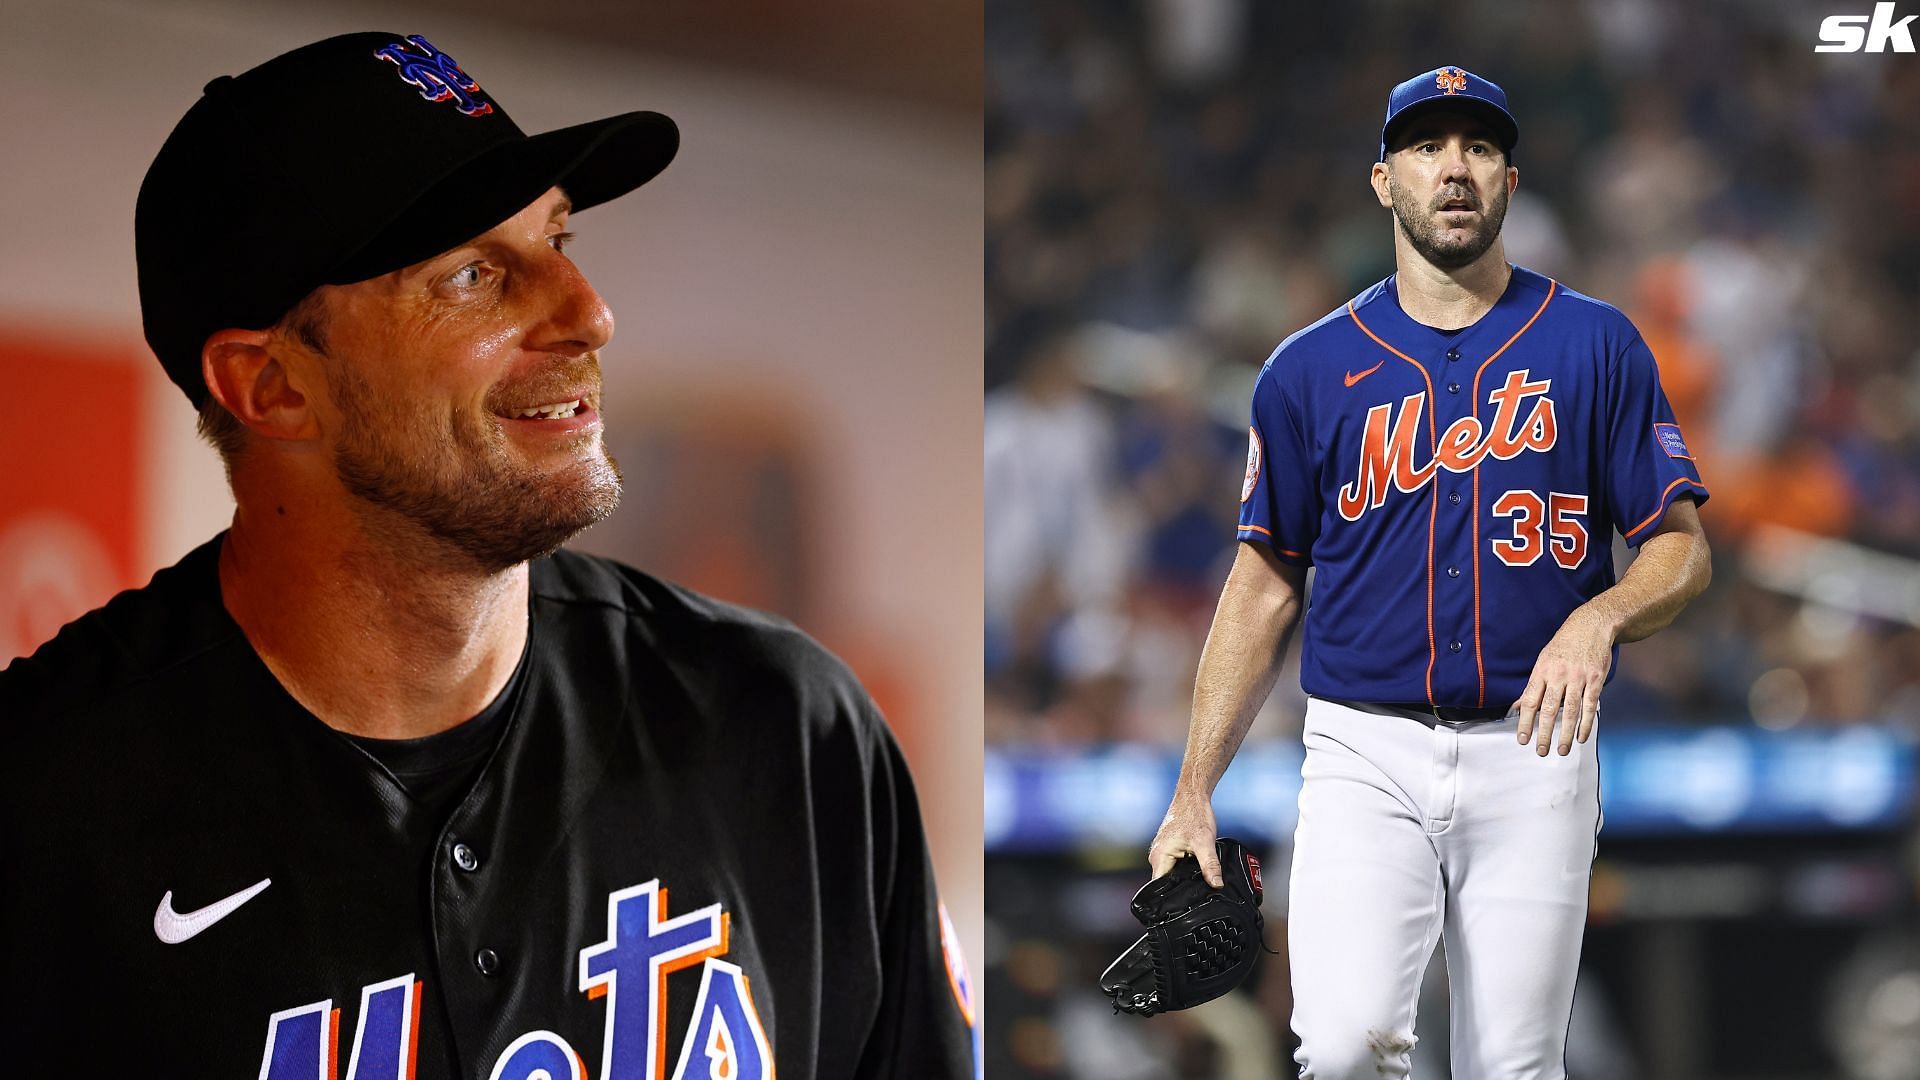 Pitchers Max Scherzer and Justin Verlander during their time with the New York Mets